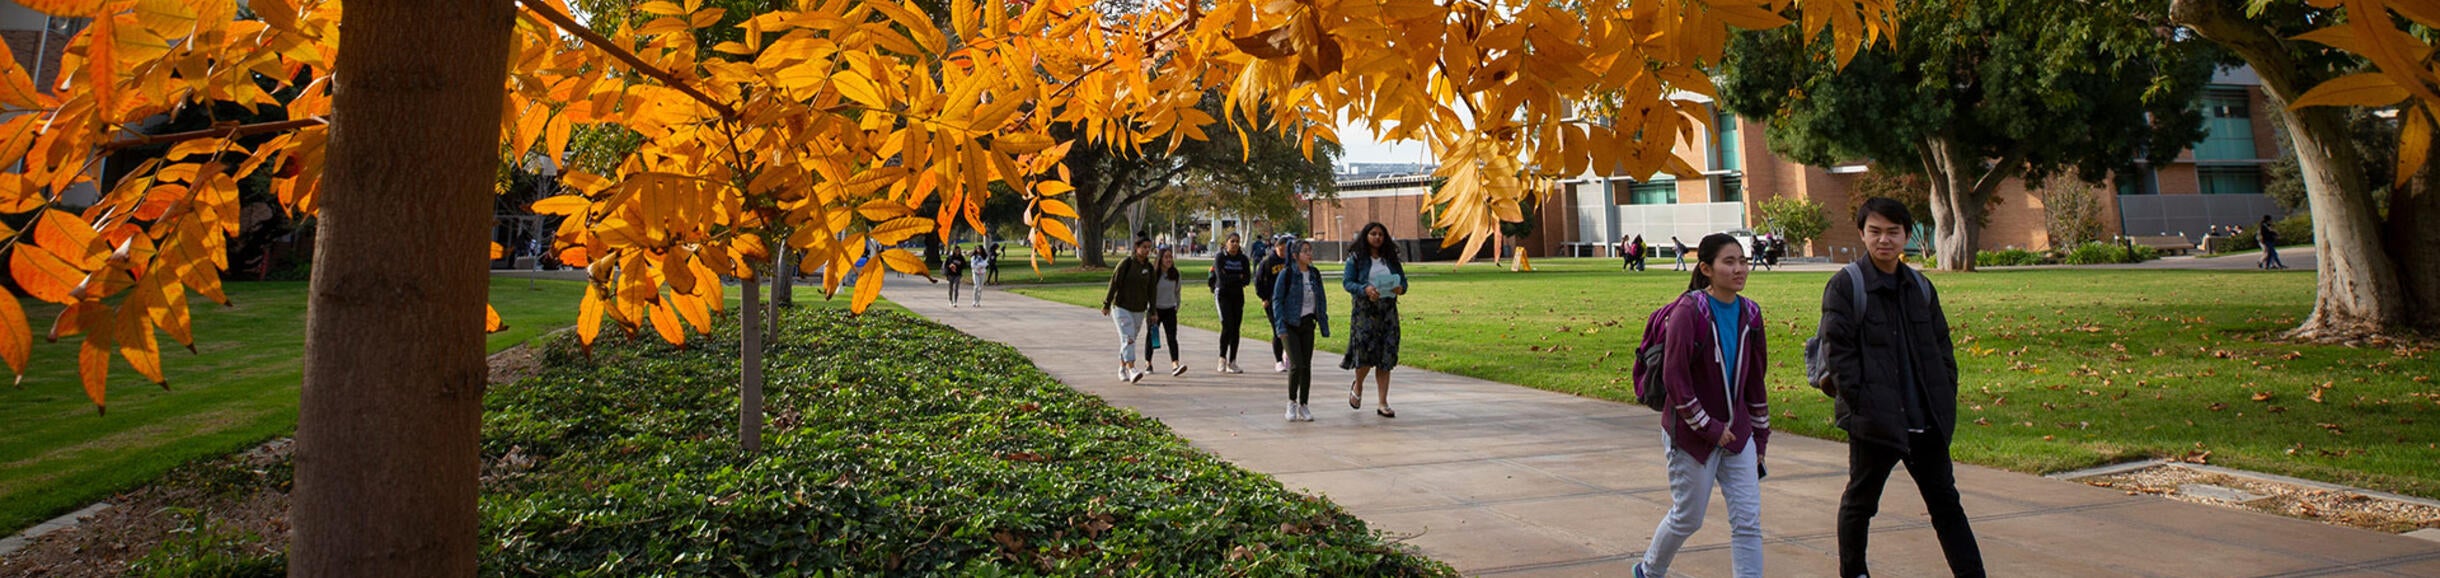 students walking under trees with fall colors (c) UCR